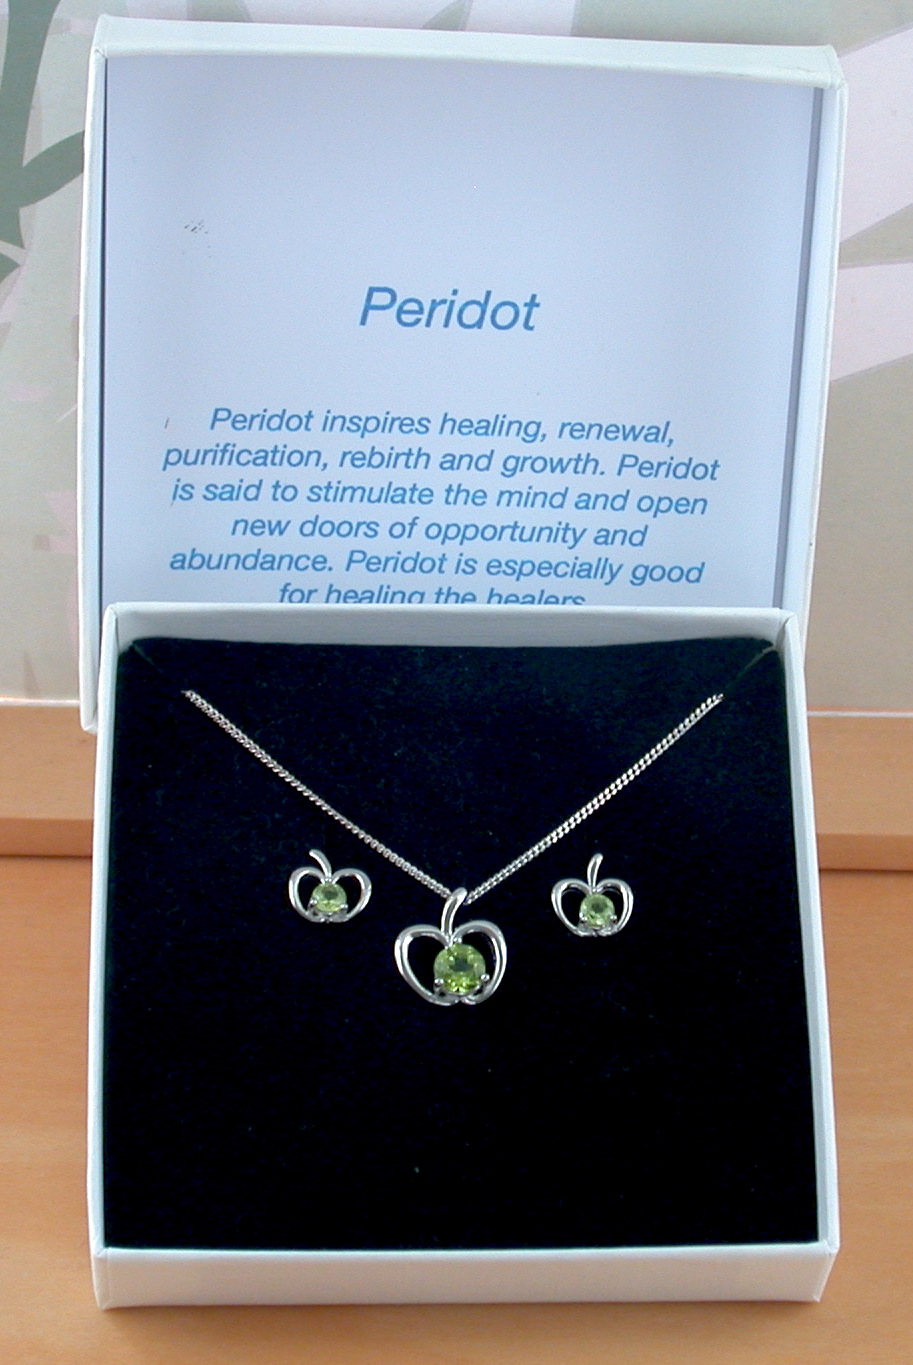 peridot apple necklace and earrings